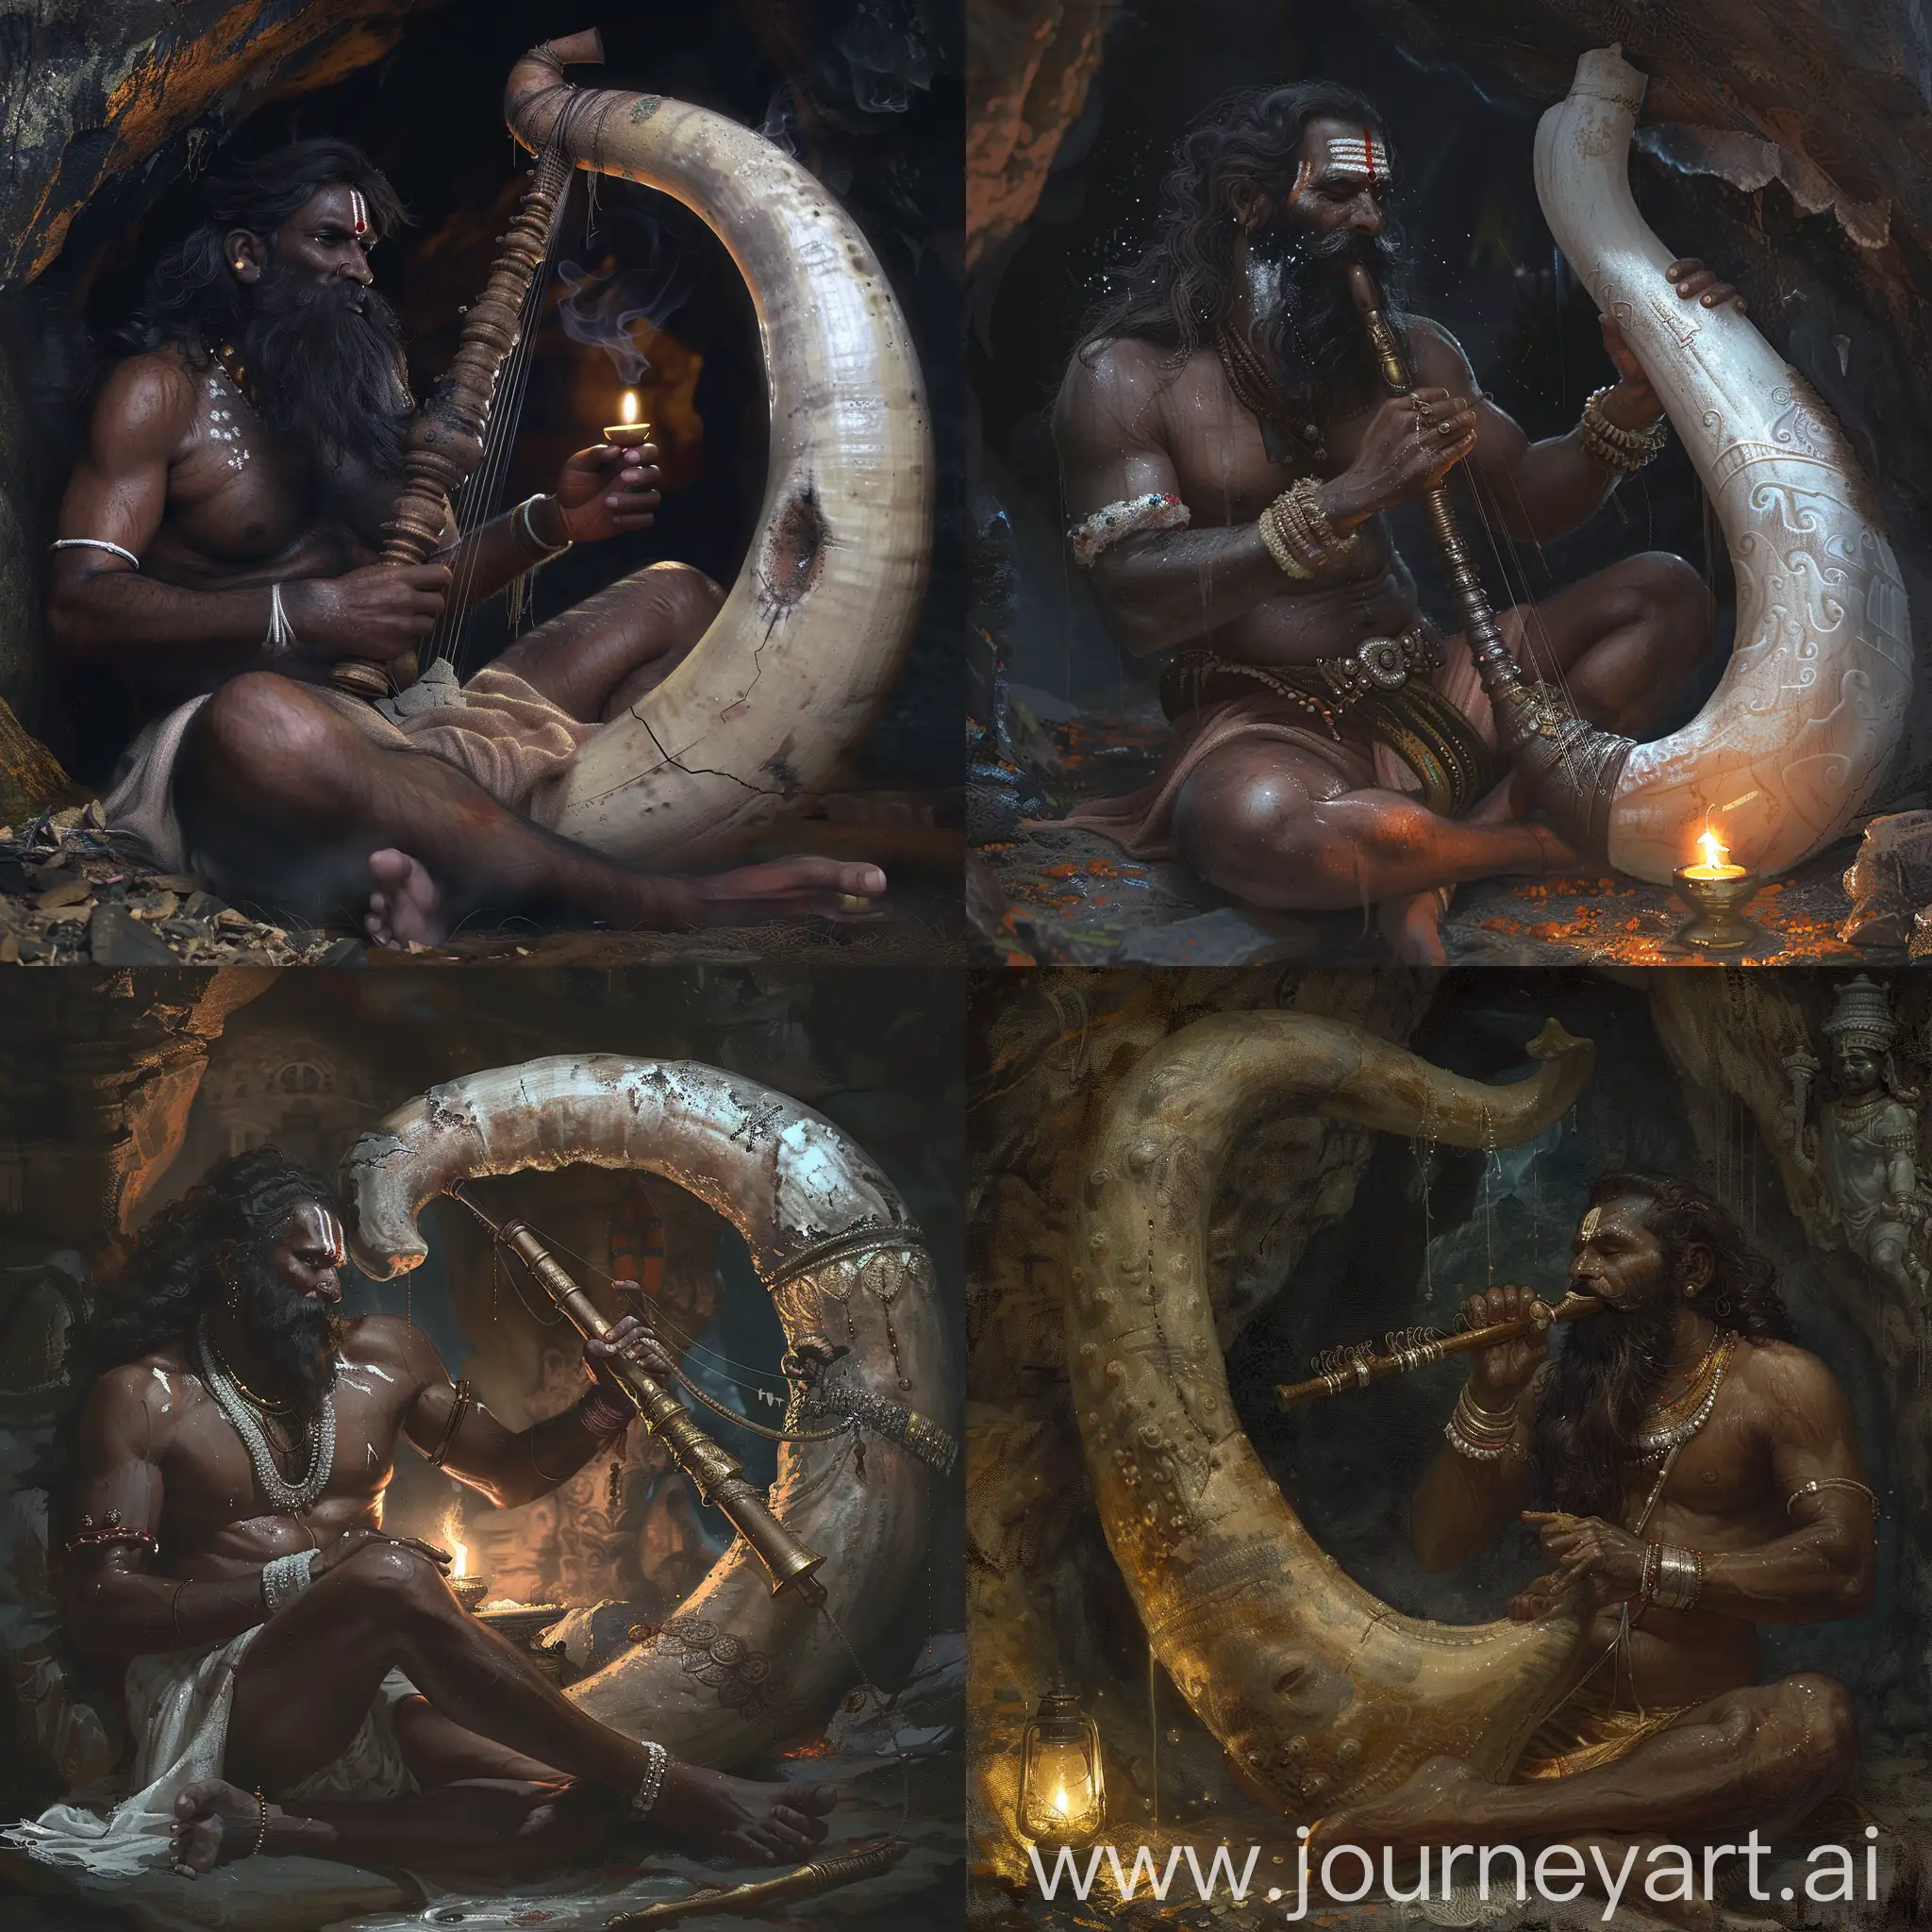 Mysterious-Night-Serenade-South-Indian-Man-Playing-Elephant-Tusk-Instrument-at-Cave-Temple